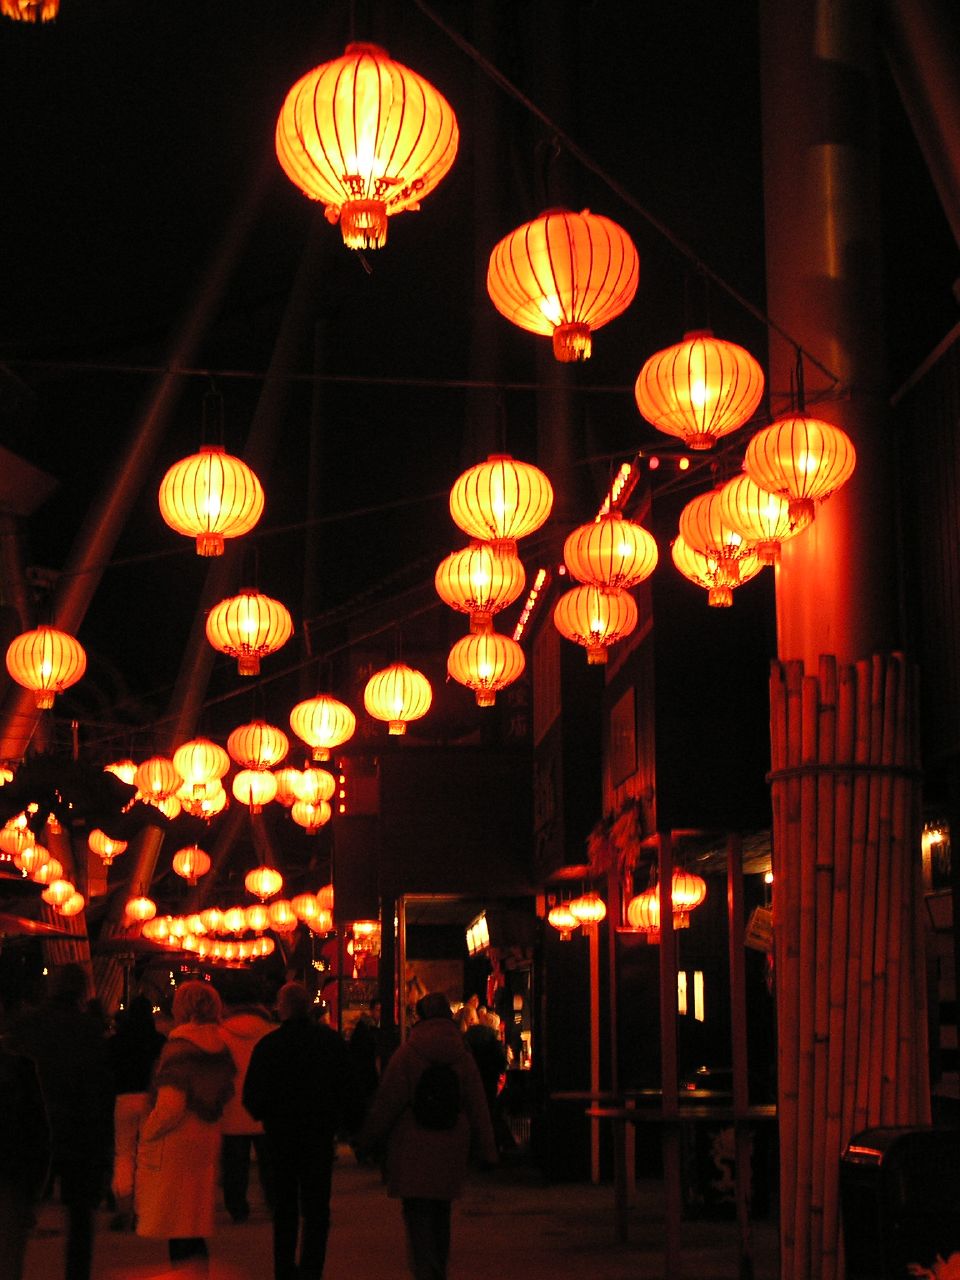 people walking down an alley with lanterns lit up at night